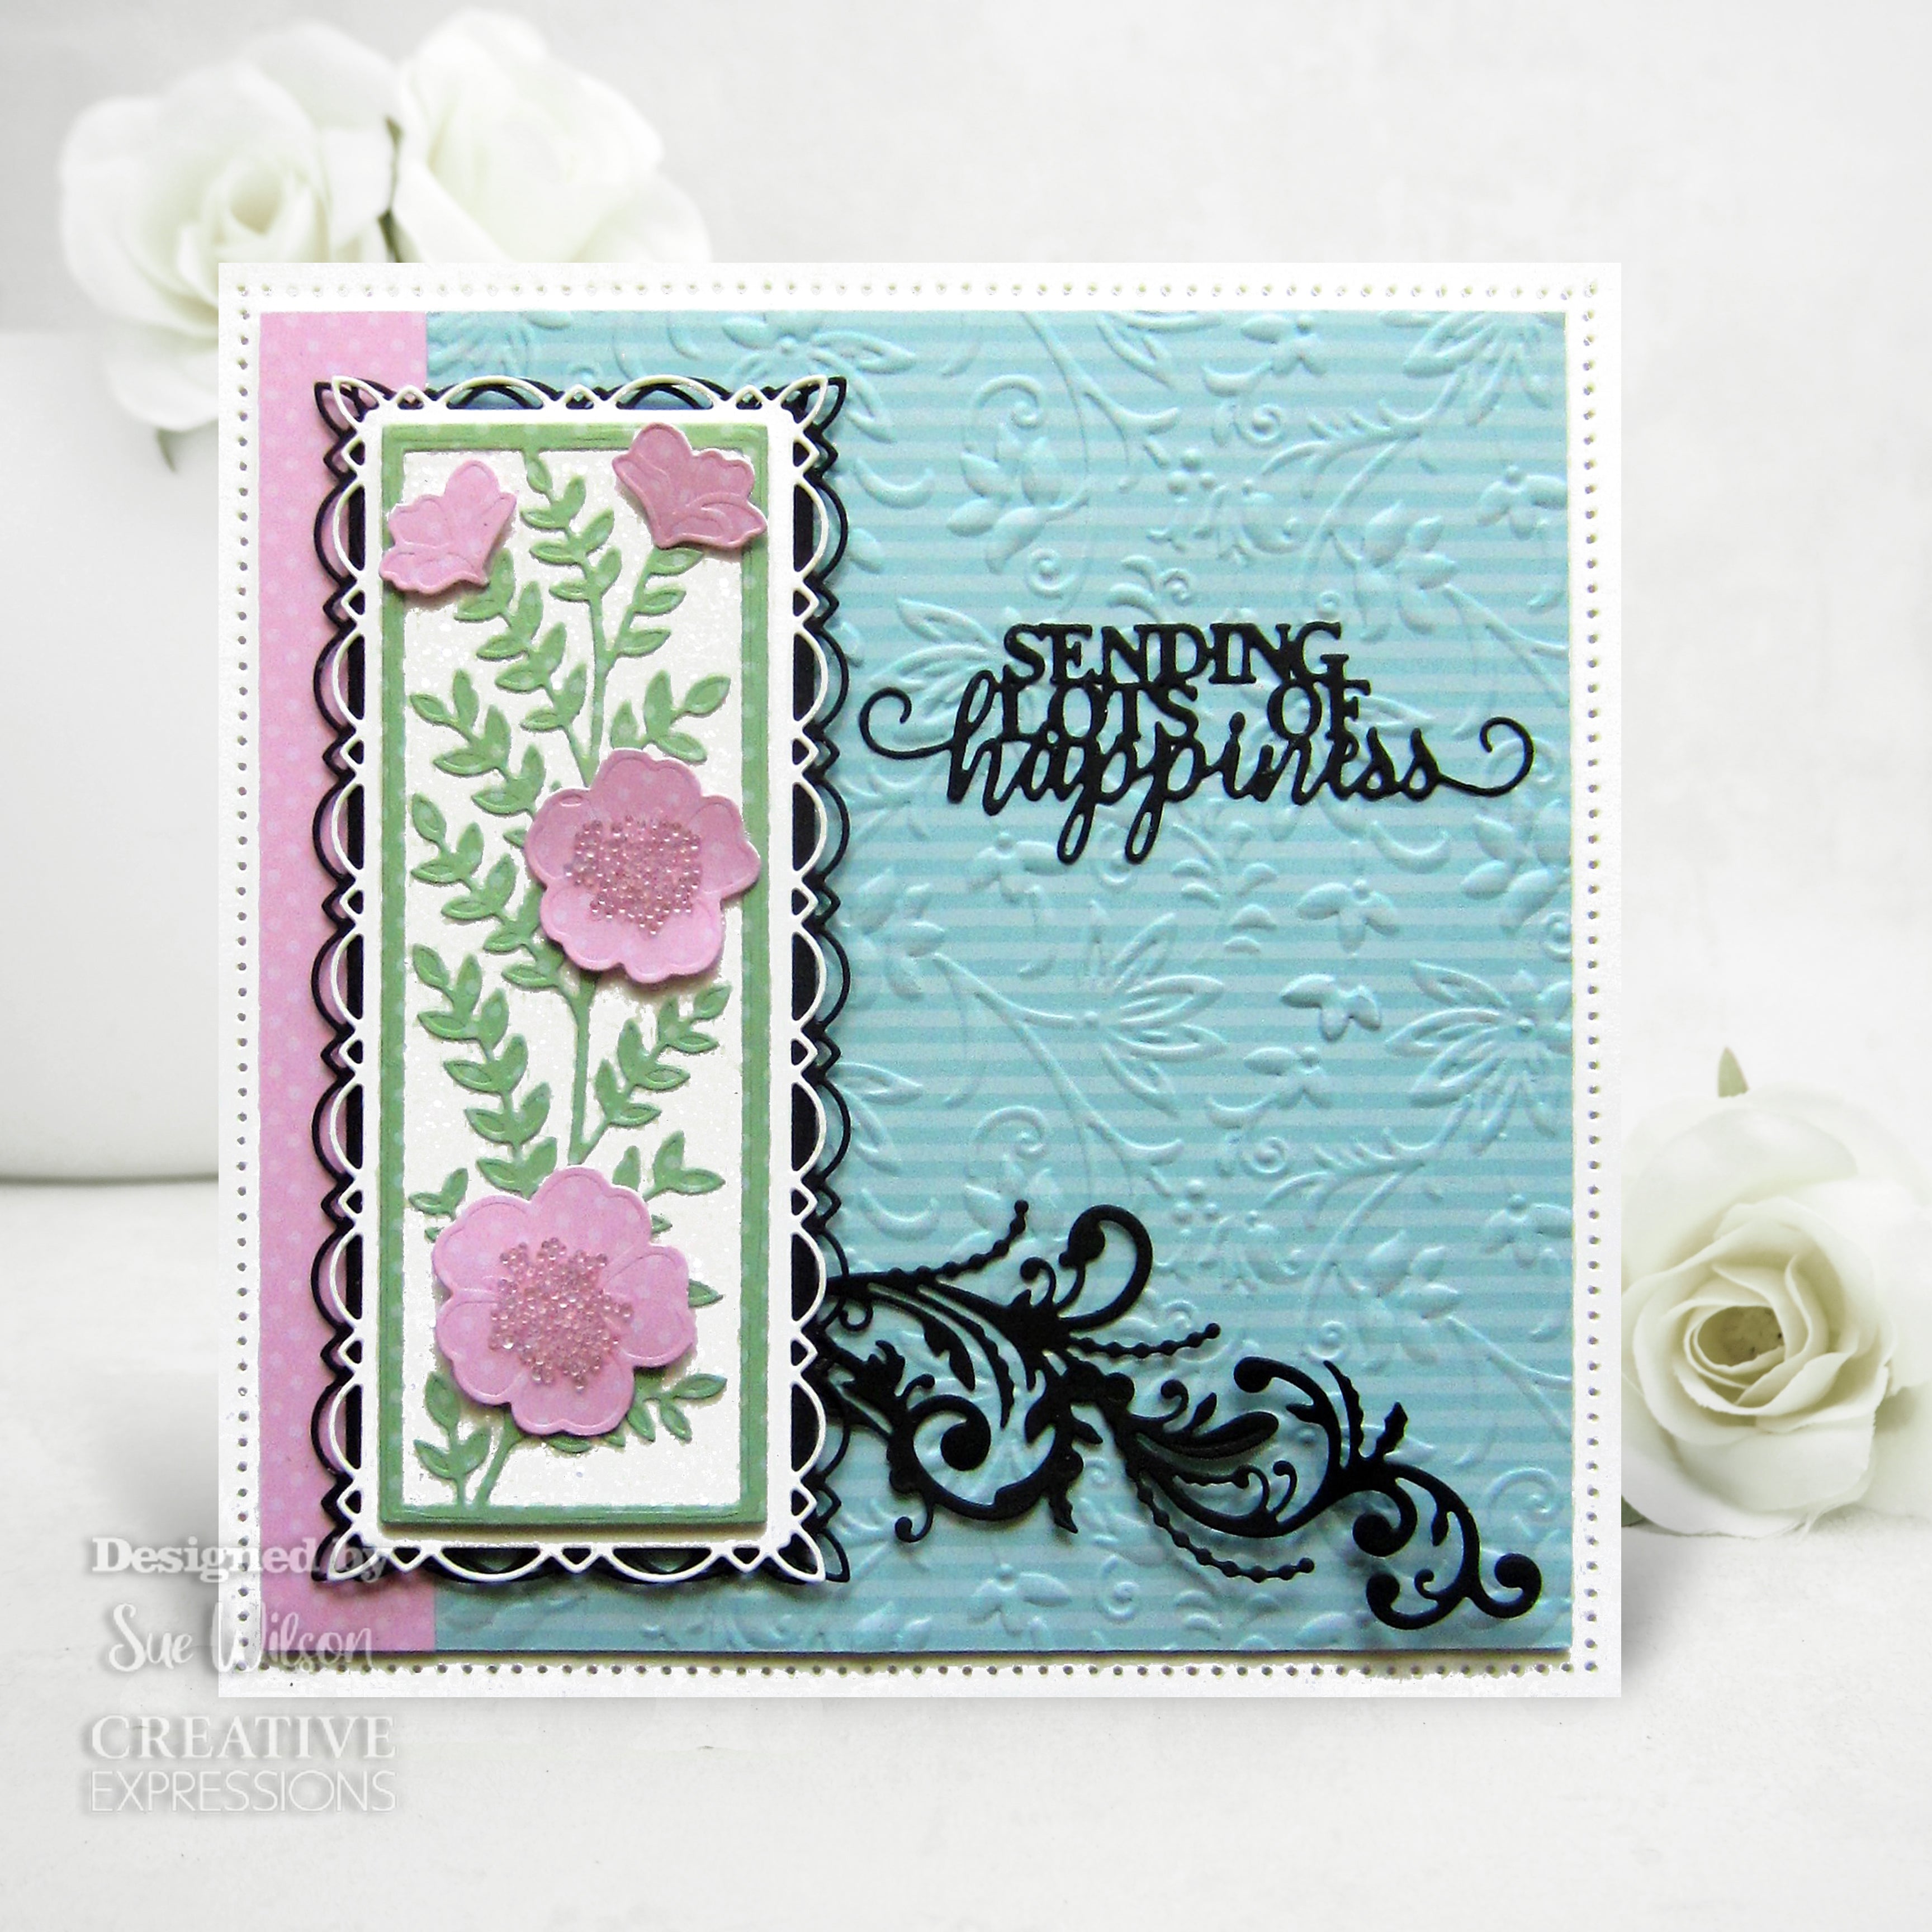 Creative Expressions Sue Wilson Mini Sentiments Sending Lots Of Happiness Craft Die